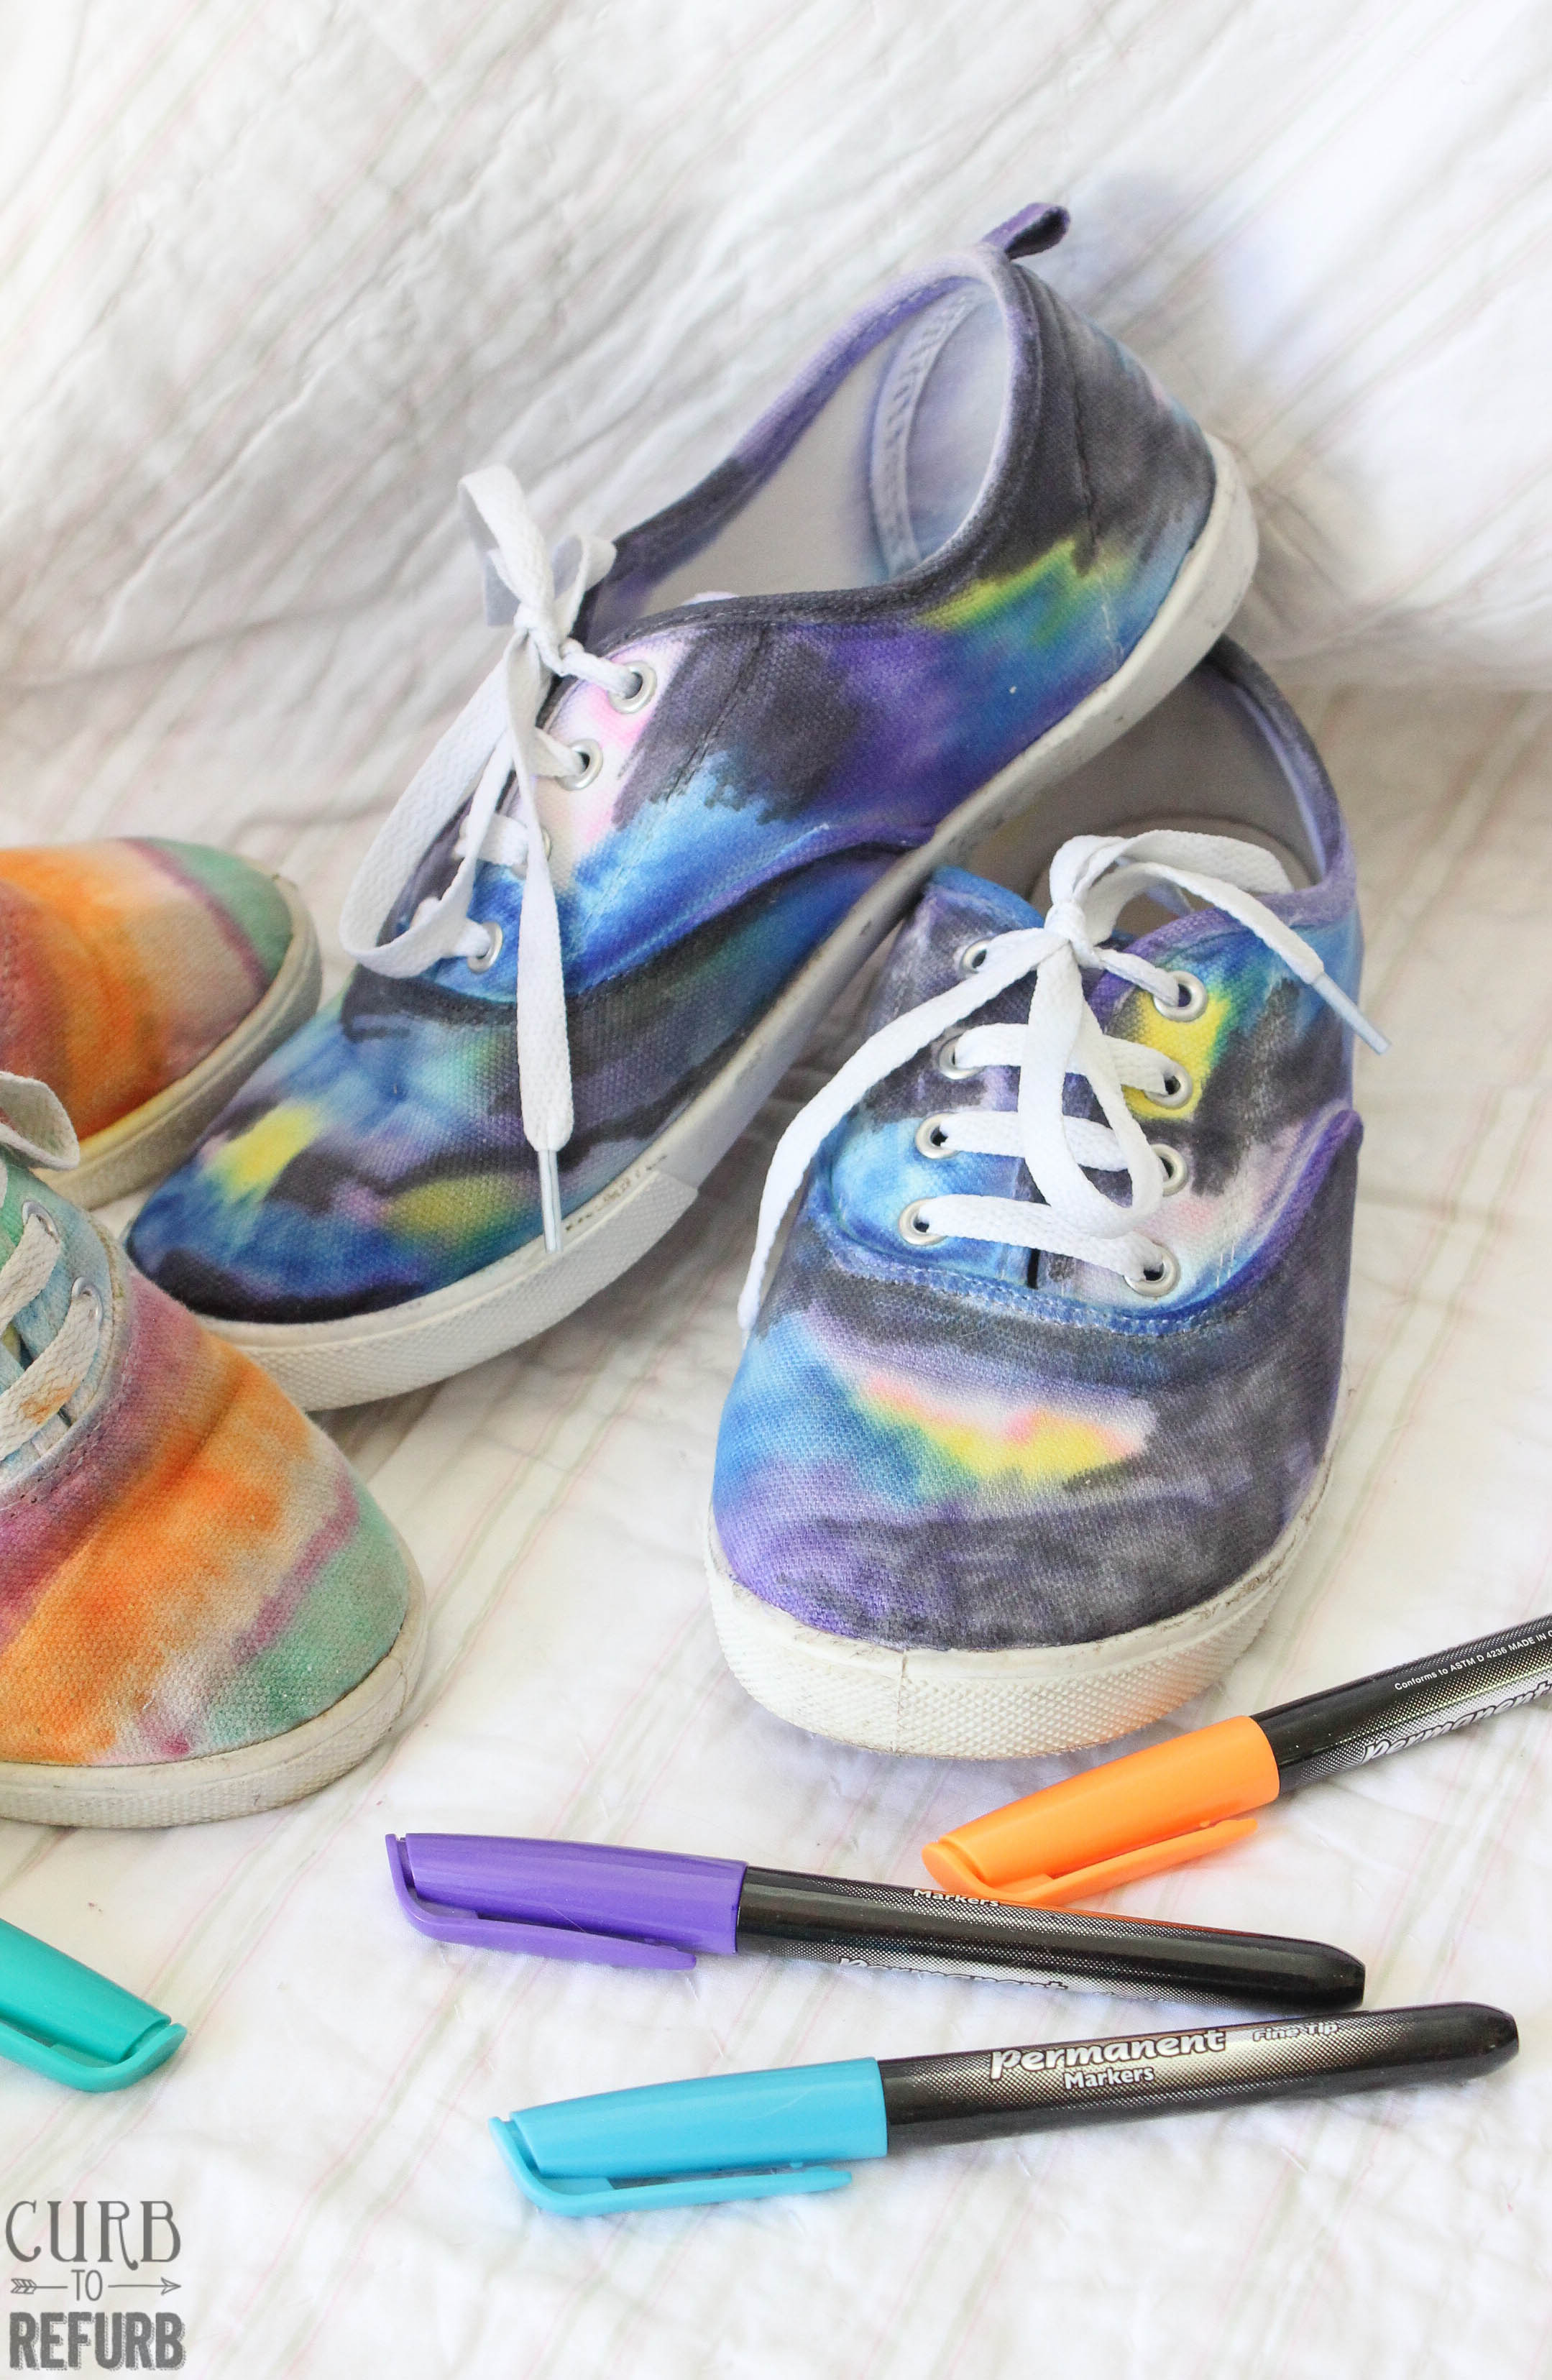 Coloring Shoes With Sharpies - CURB TO 